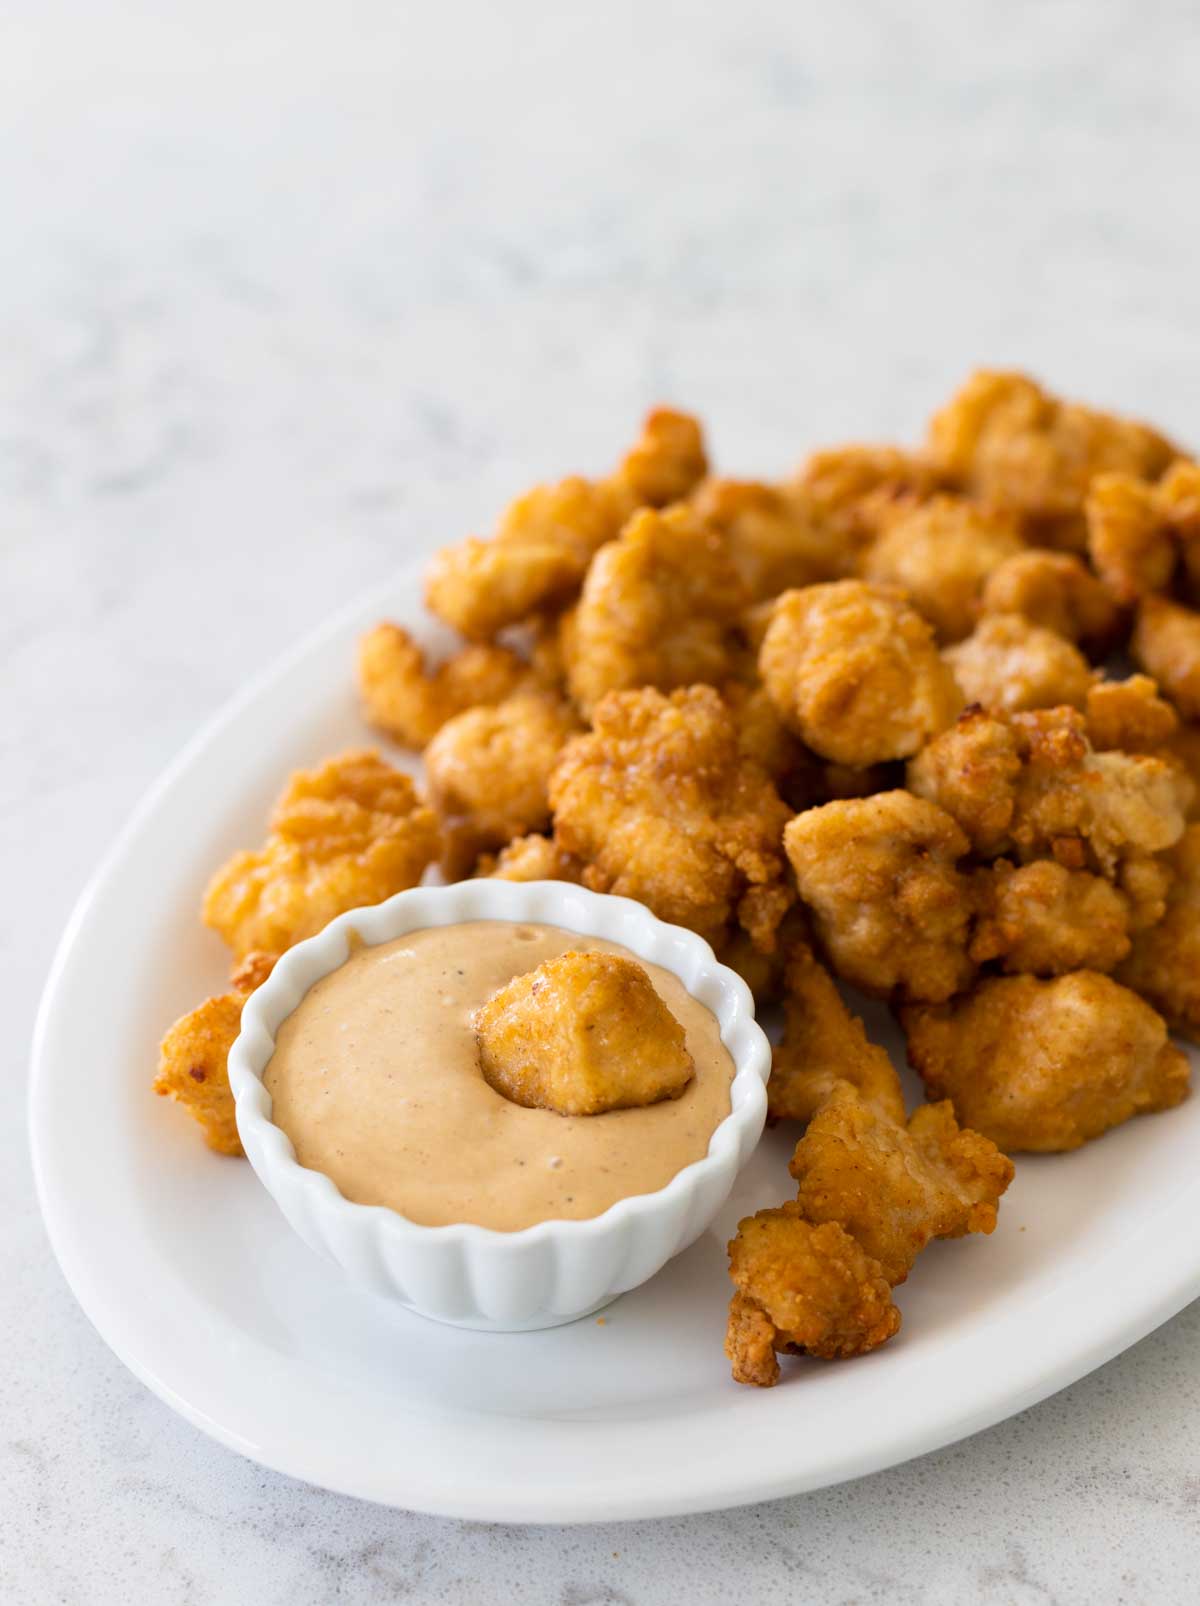 The cup of Chick-Fil-A Sauce has a chicken nugget being dunked in it. The cup rests on a platter of chicken nuggets.